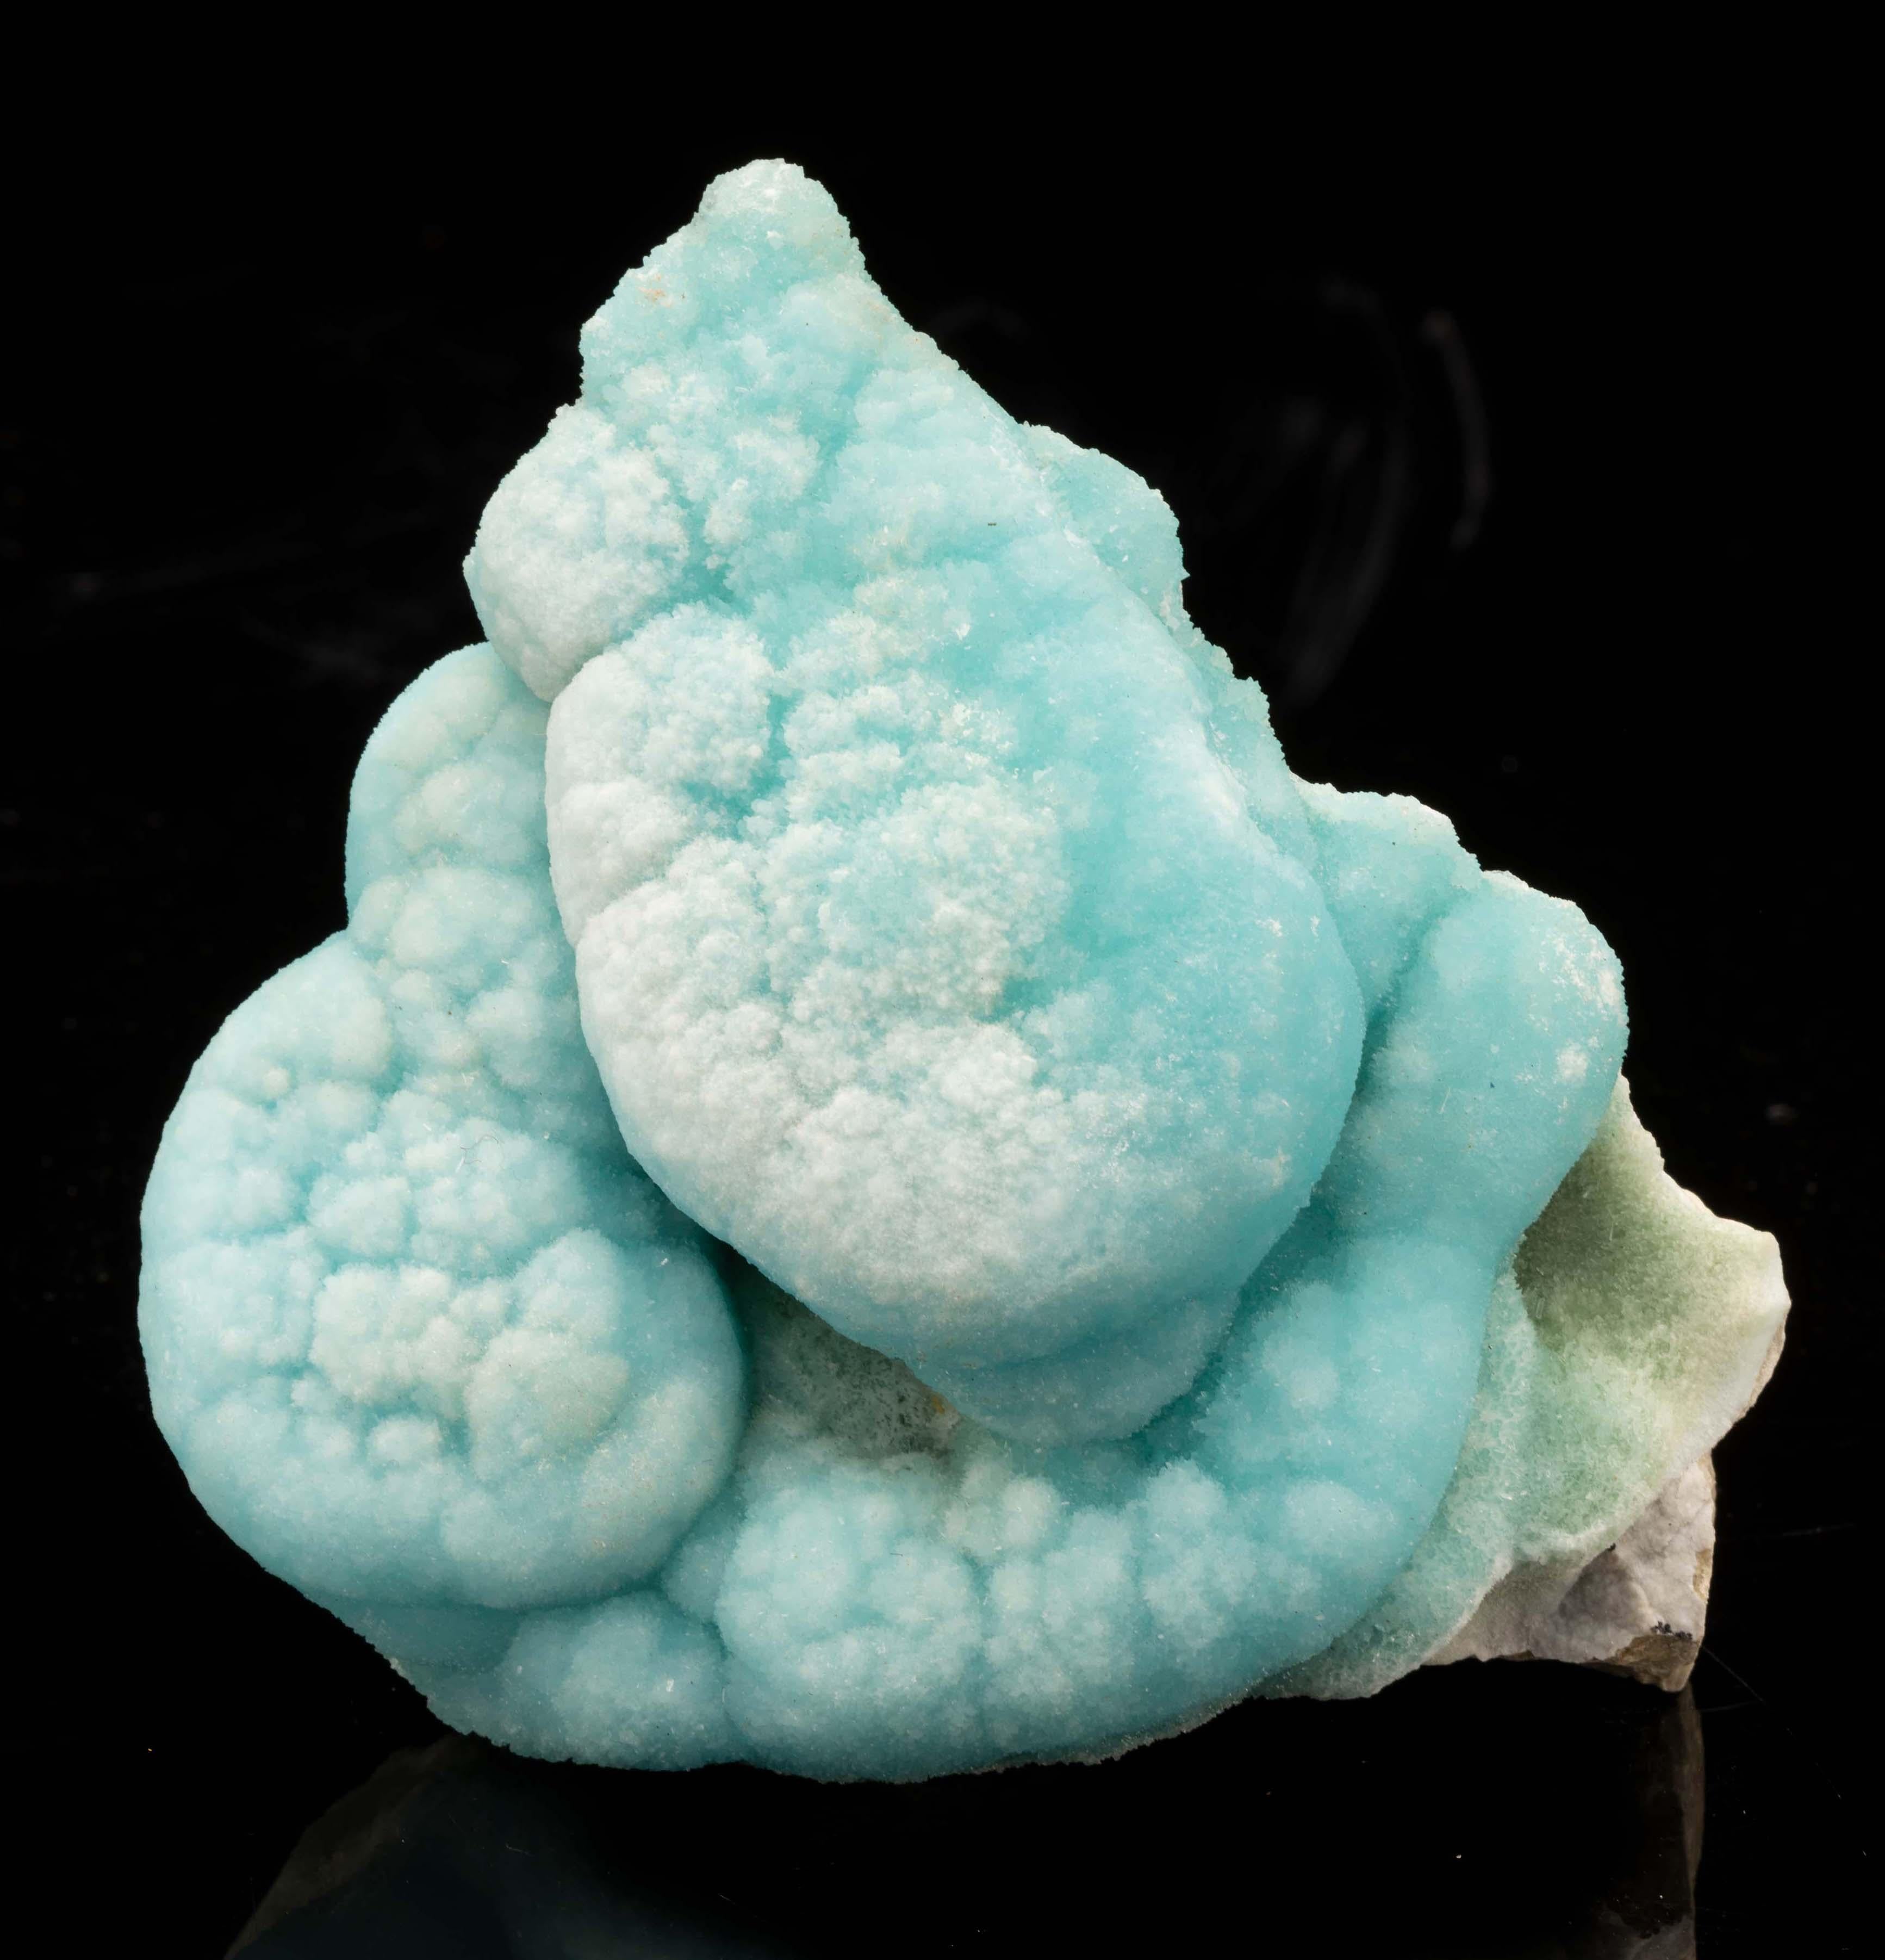 This serenely hued teal blue aragonite is a special find perfect for the discerning mineral enthusiast. The crystallized blue form of the calcium carbonate mineral is very sought-after and it's unusual to find pieces with such great luster and